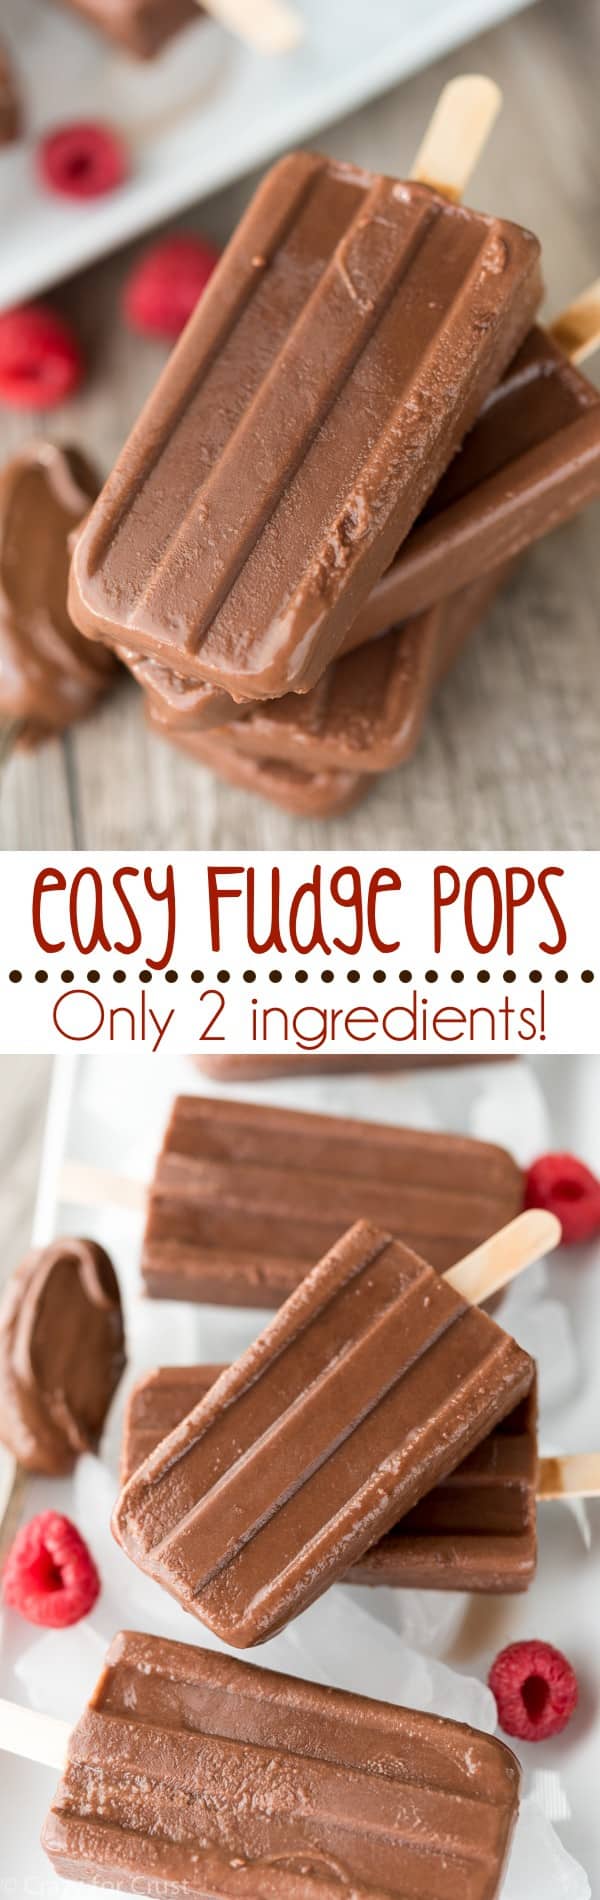 Easy Fudge Pops with only 2 ingredients - like a fudgesicle only BETTER!